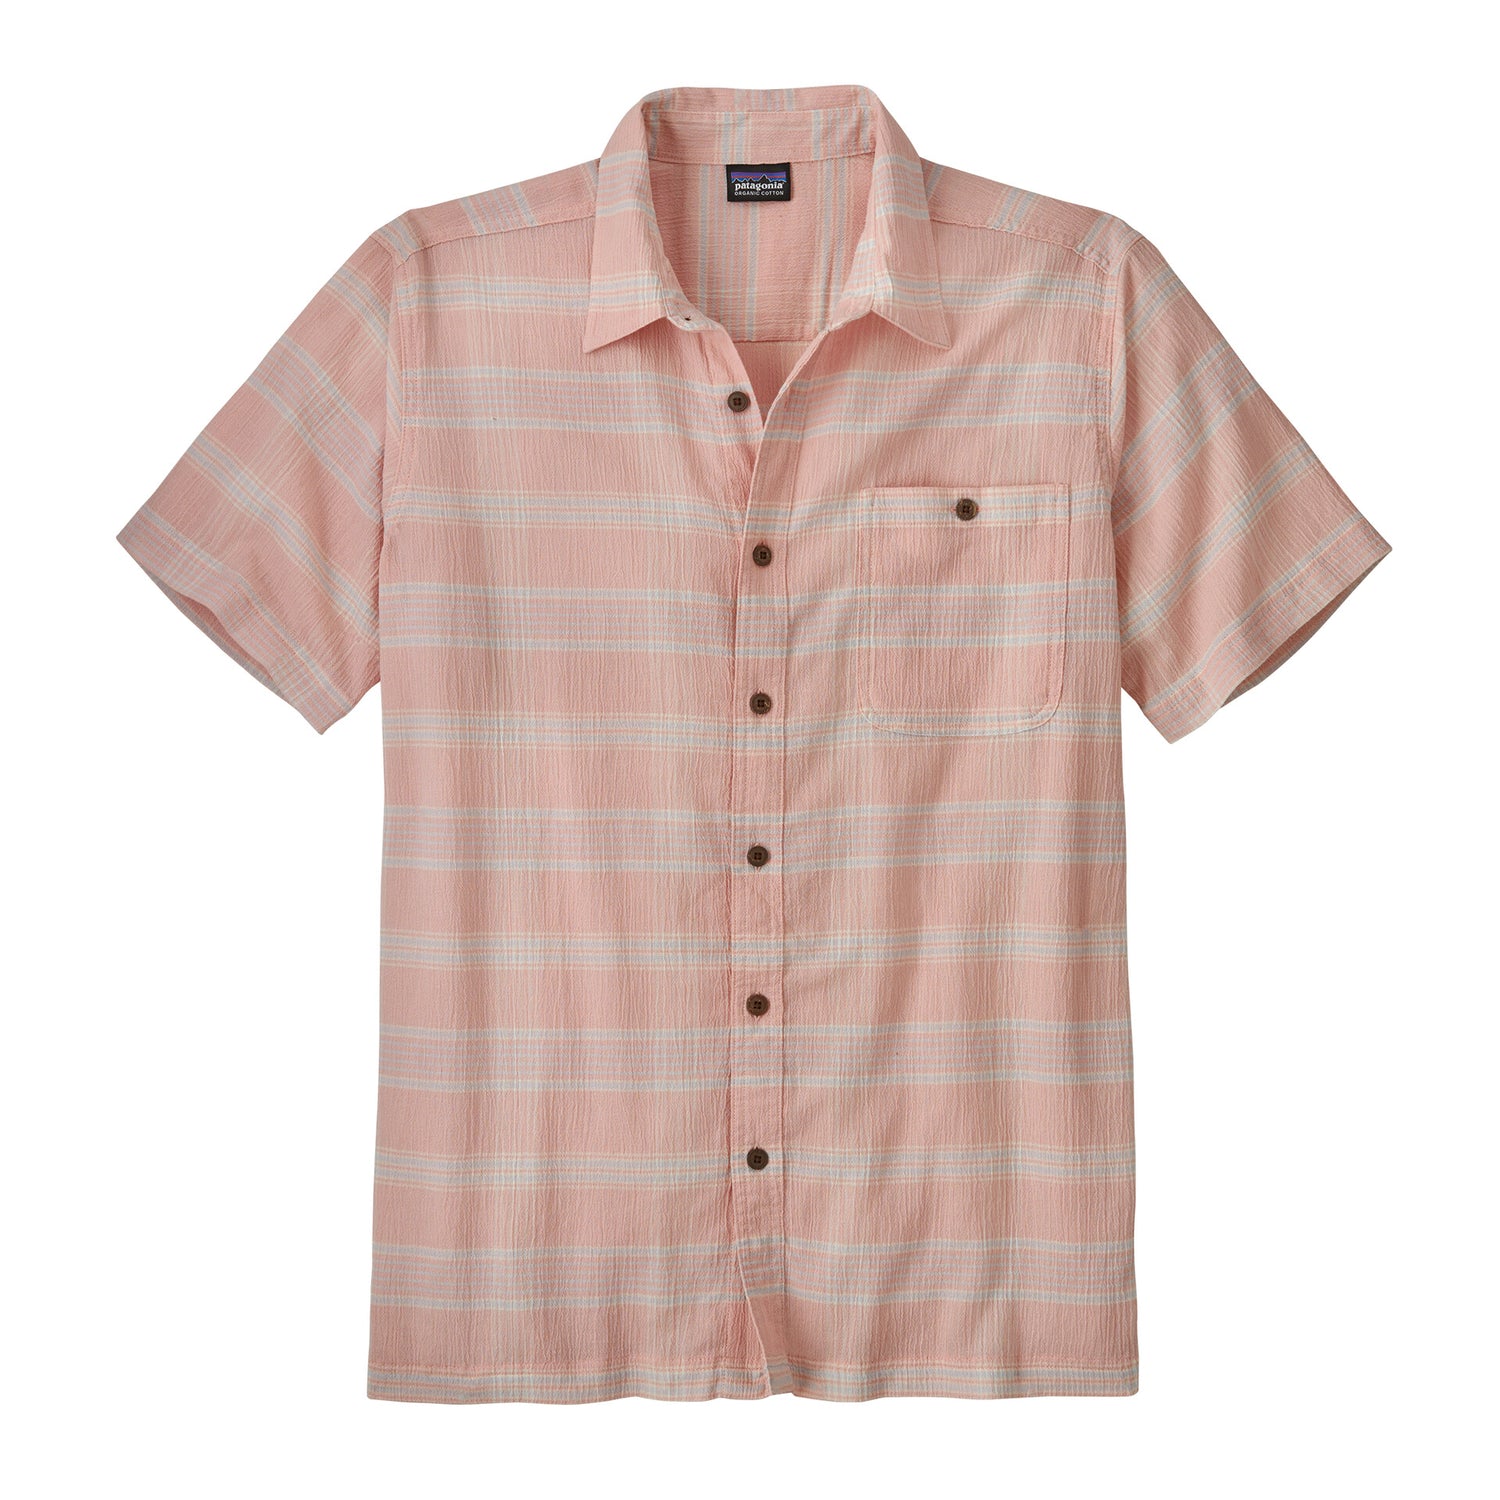 M'S A/C SHIRT DISCOVERY WHISKER PINK